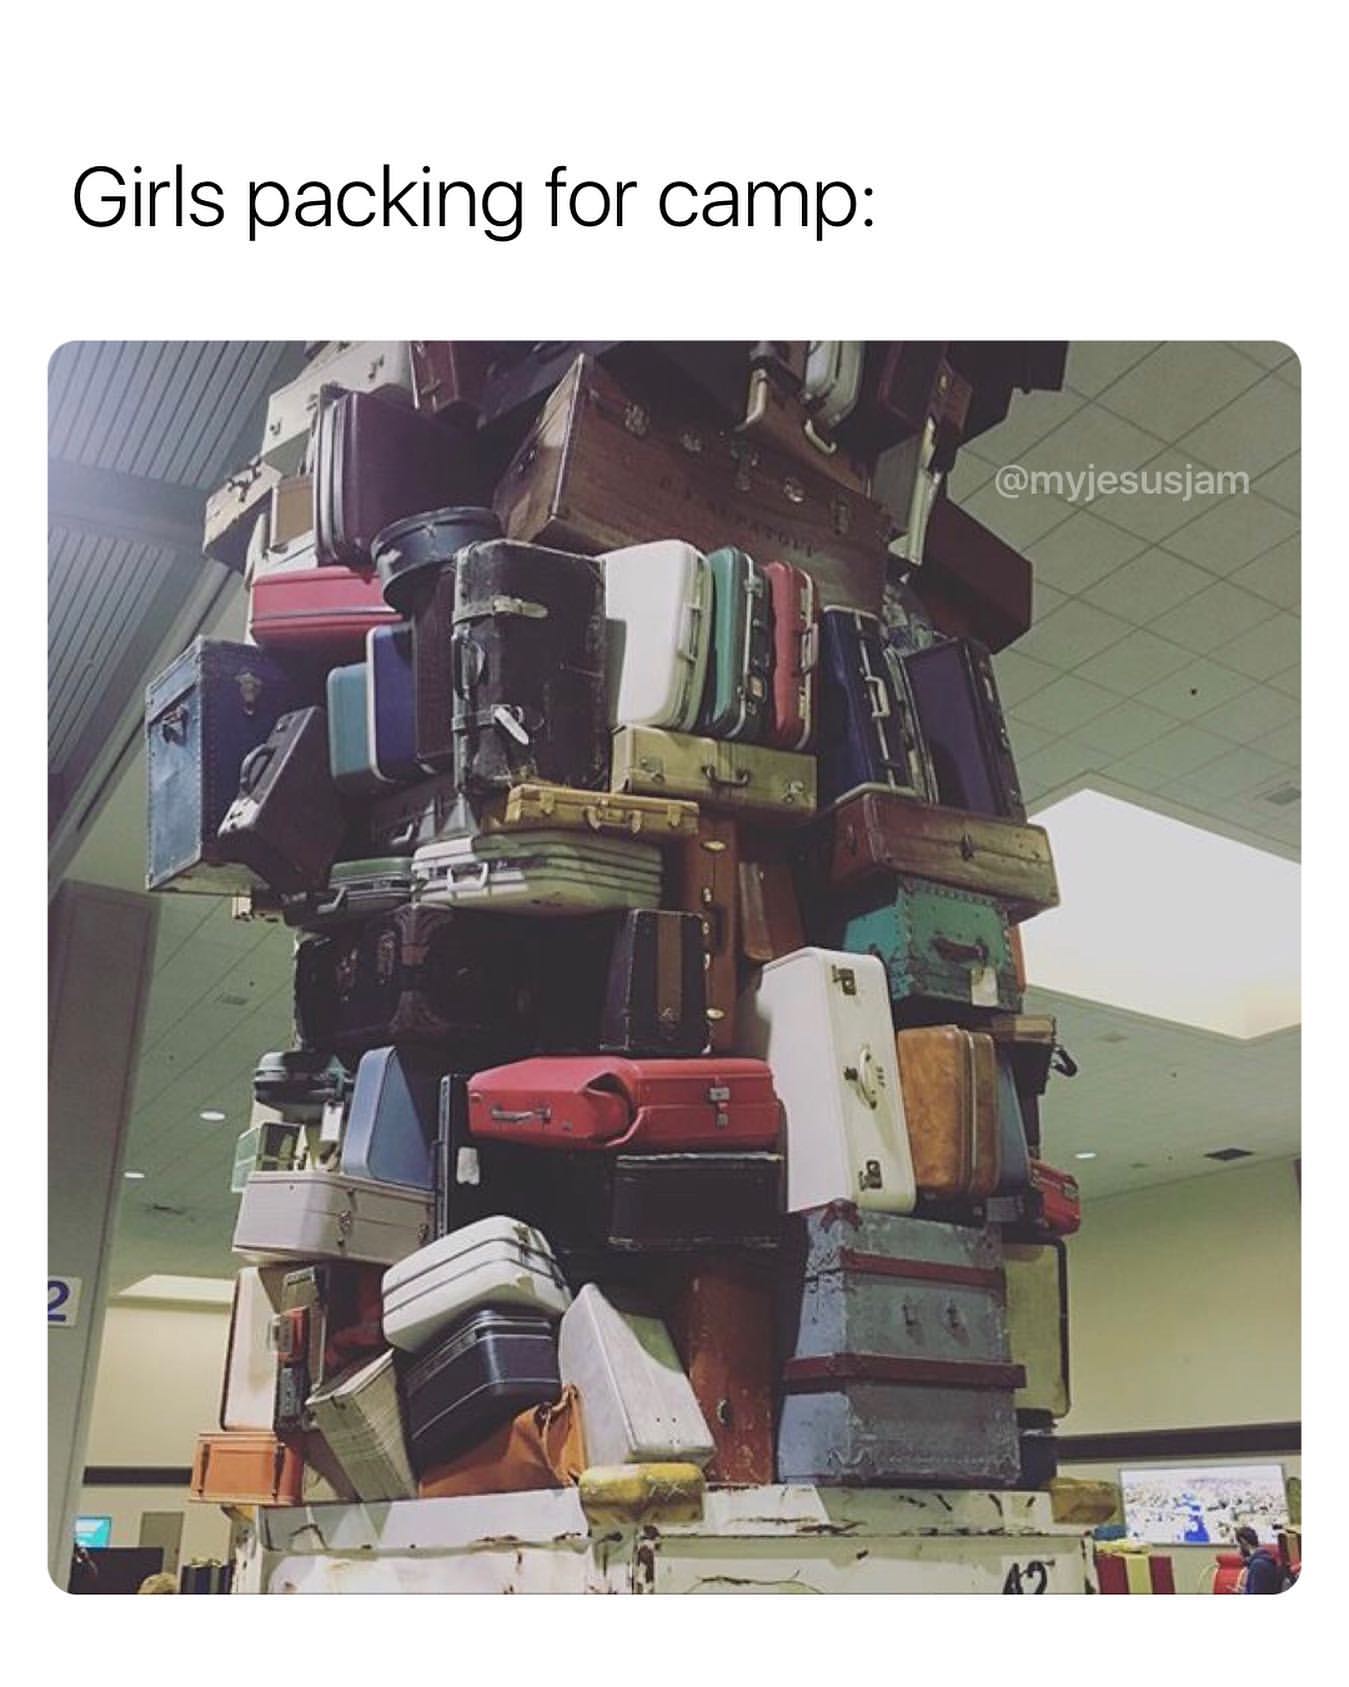 Girls packing for camp: